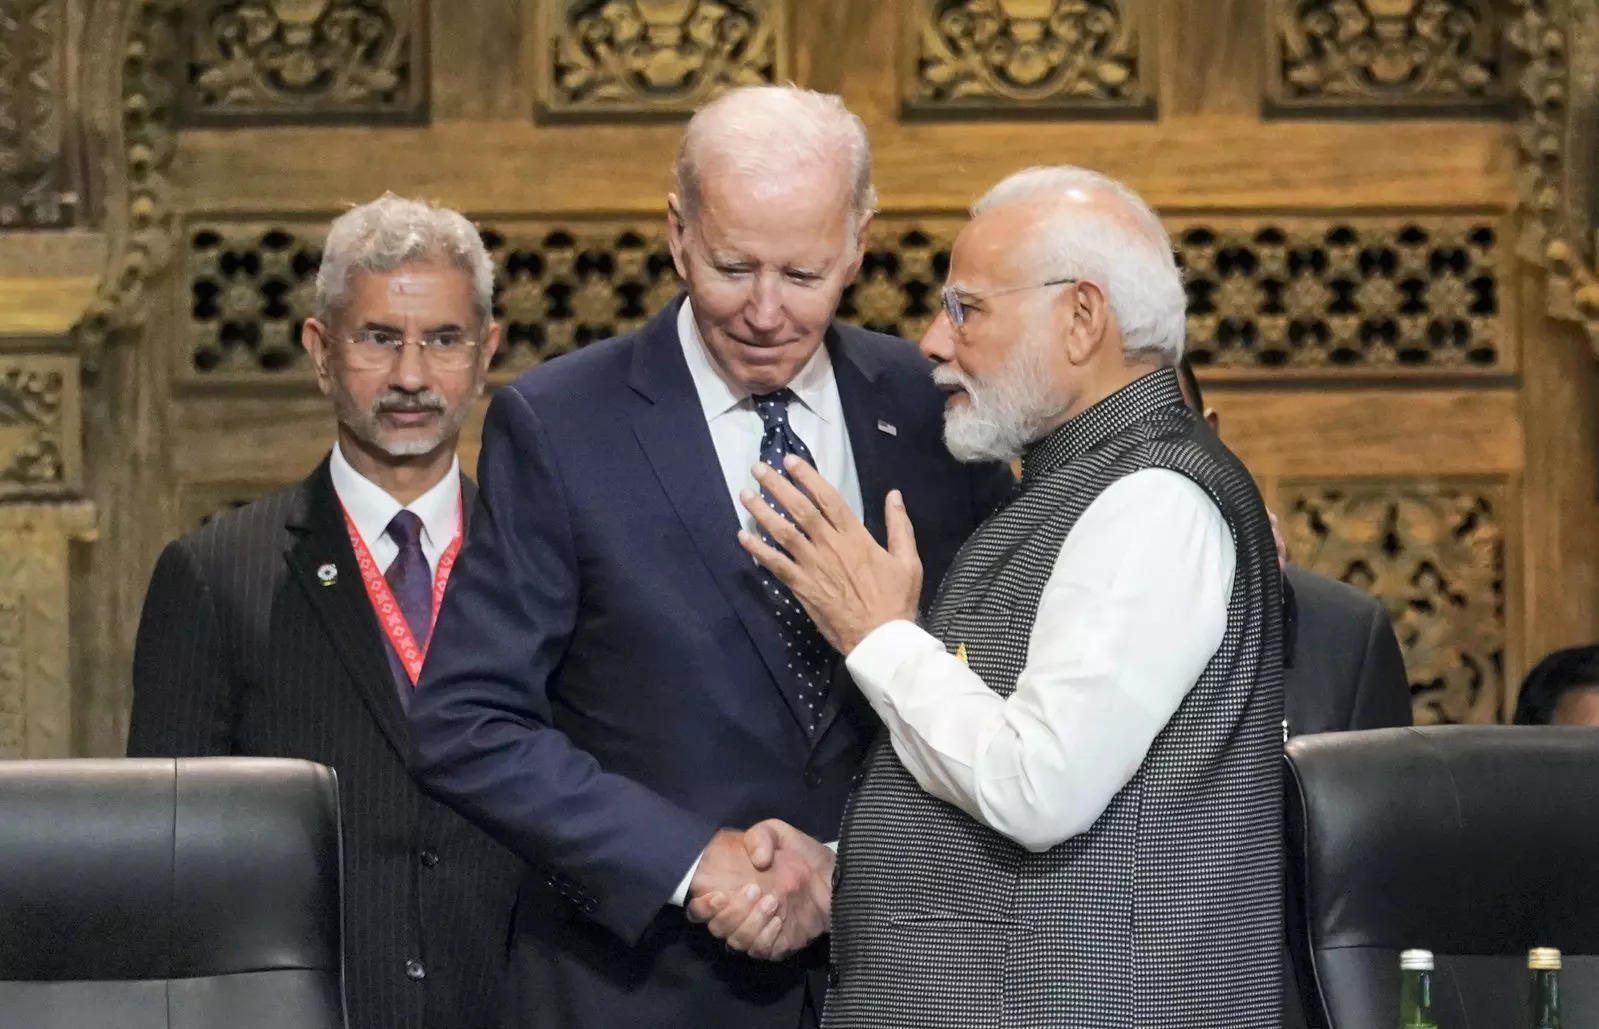 Indian Prime Minister Narendra Modi shakes hands with US President Joe Biden as India's Foreign Minister Subrahmanyam Jaishankar watches during the first working session of the G20 leaders' summit in Nusa Dua, Indonesia. (AP/PTI Photo)